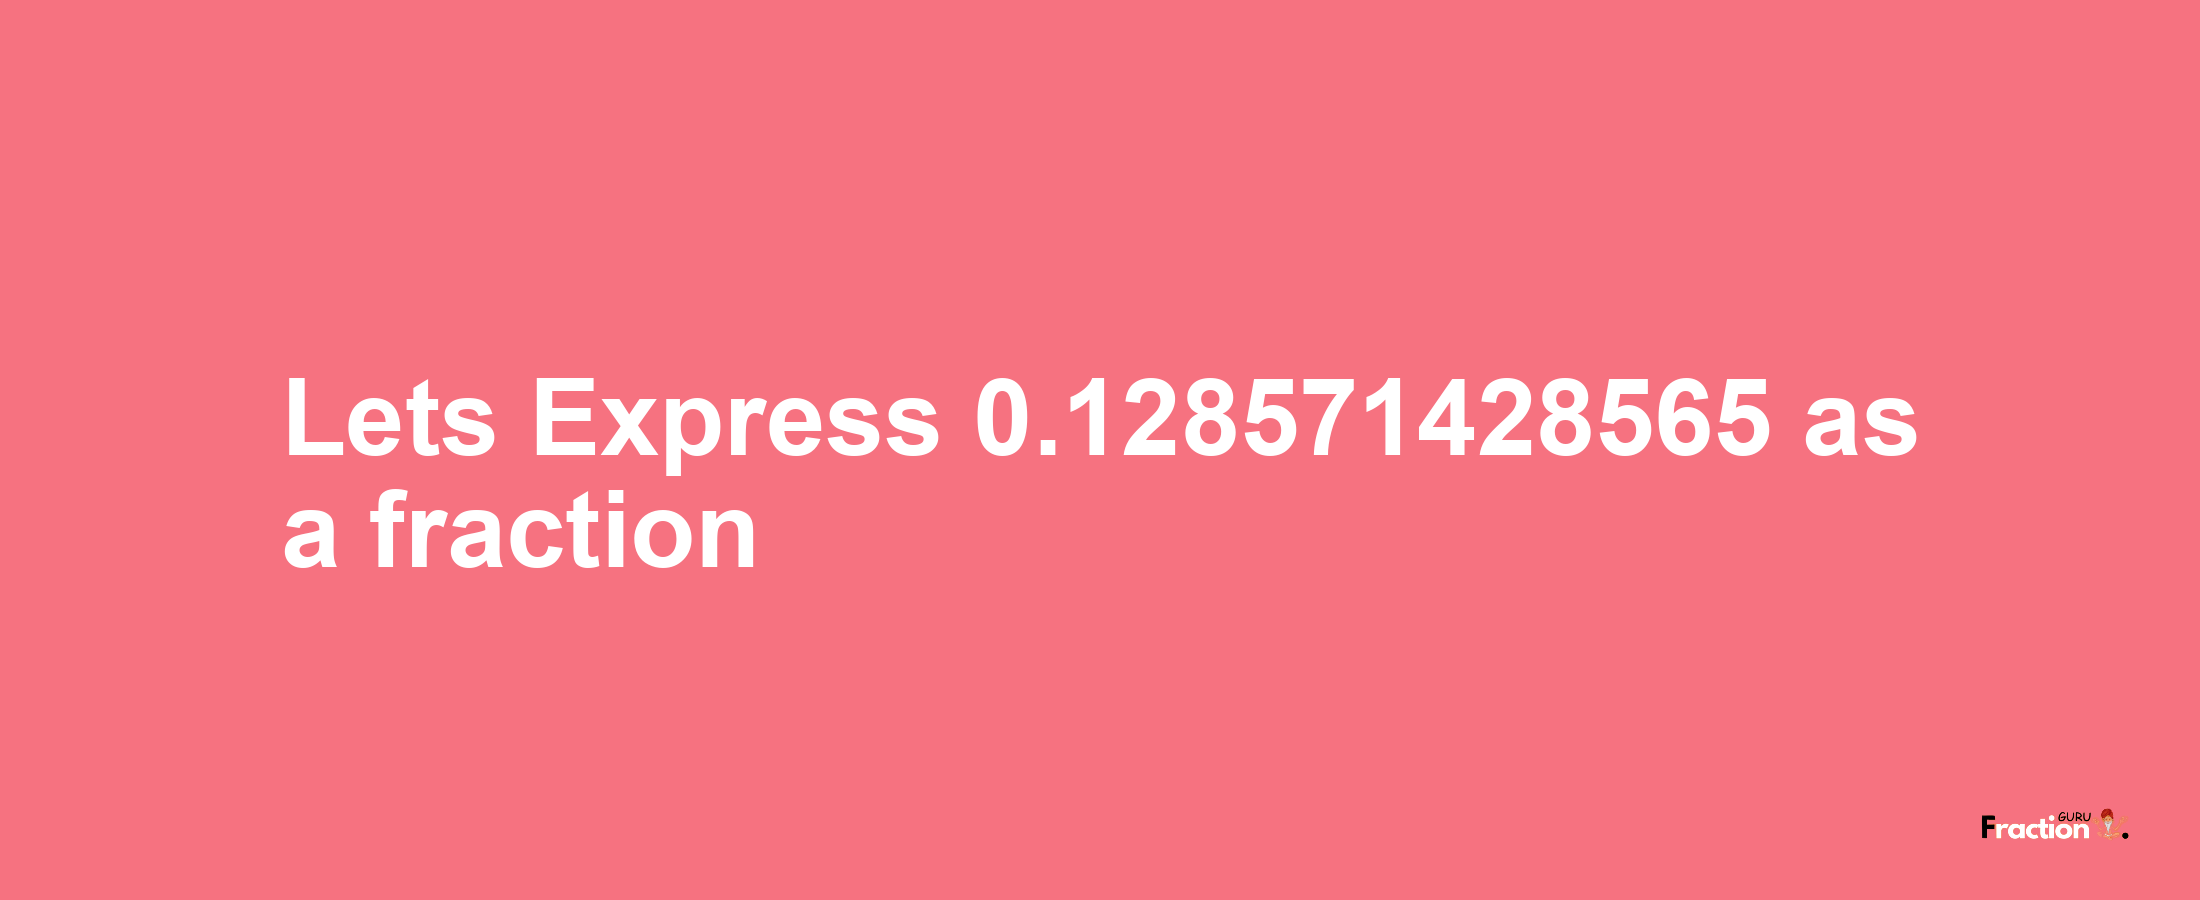 Lets Express 0.128571428565 as afraction